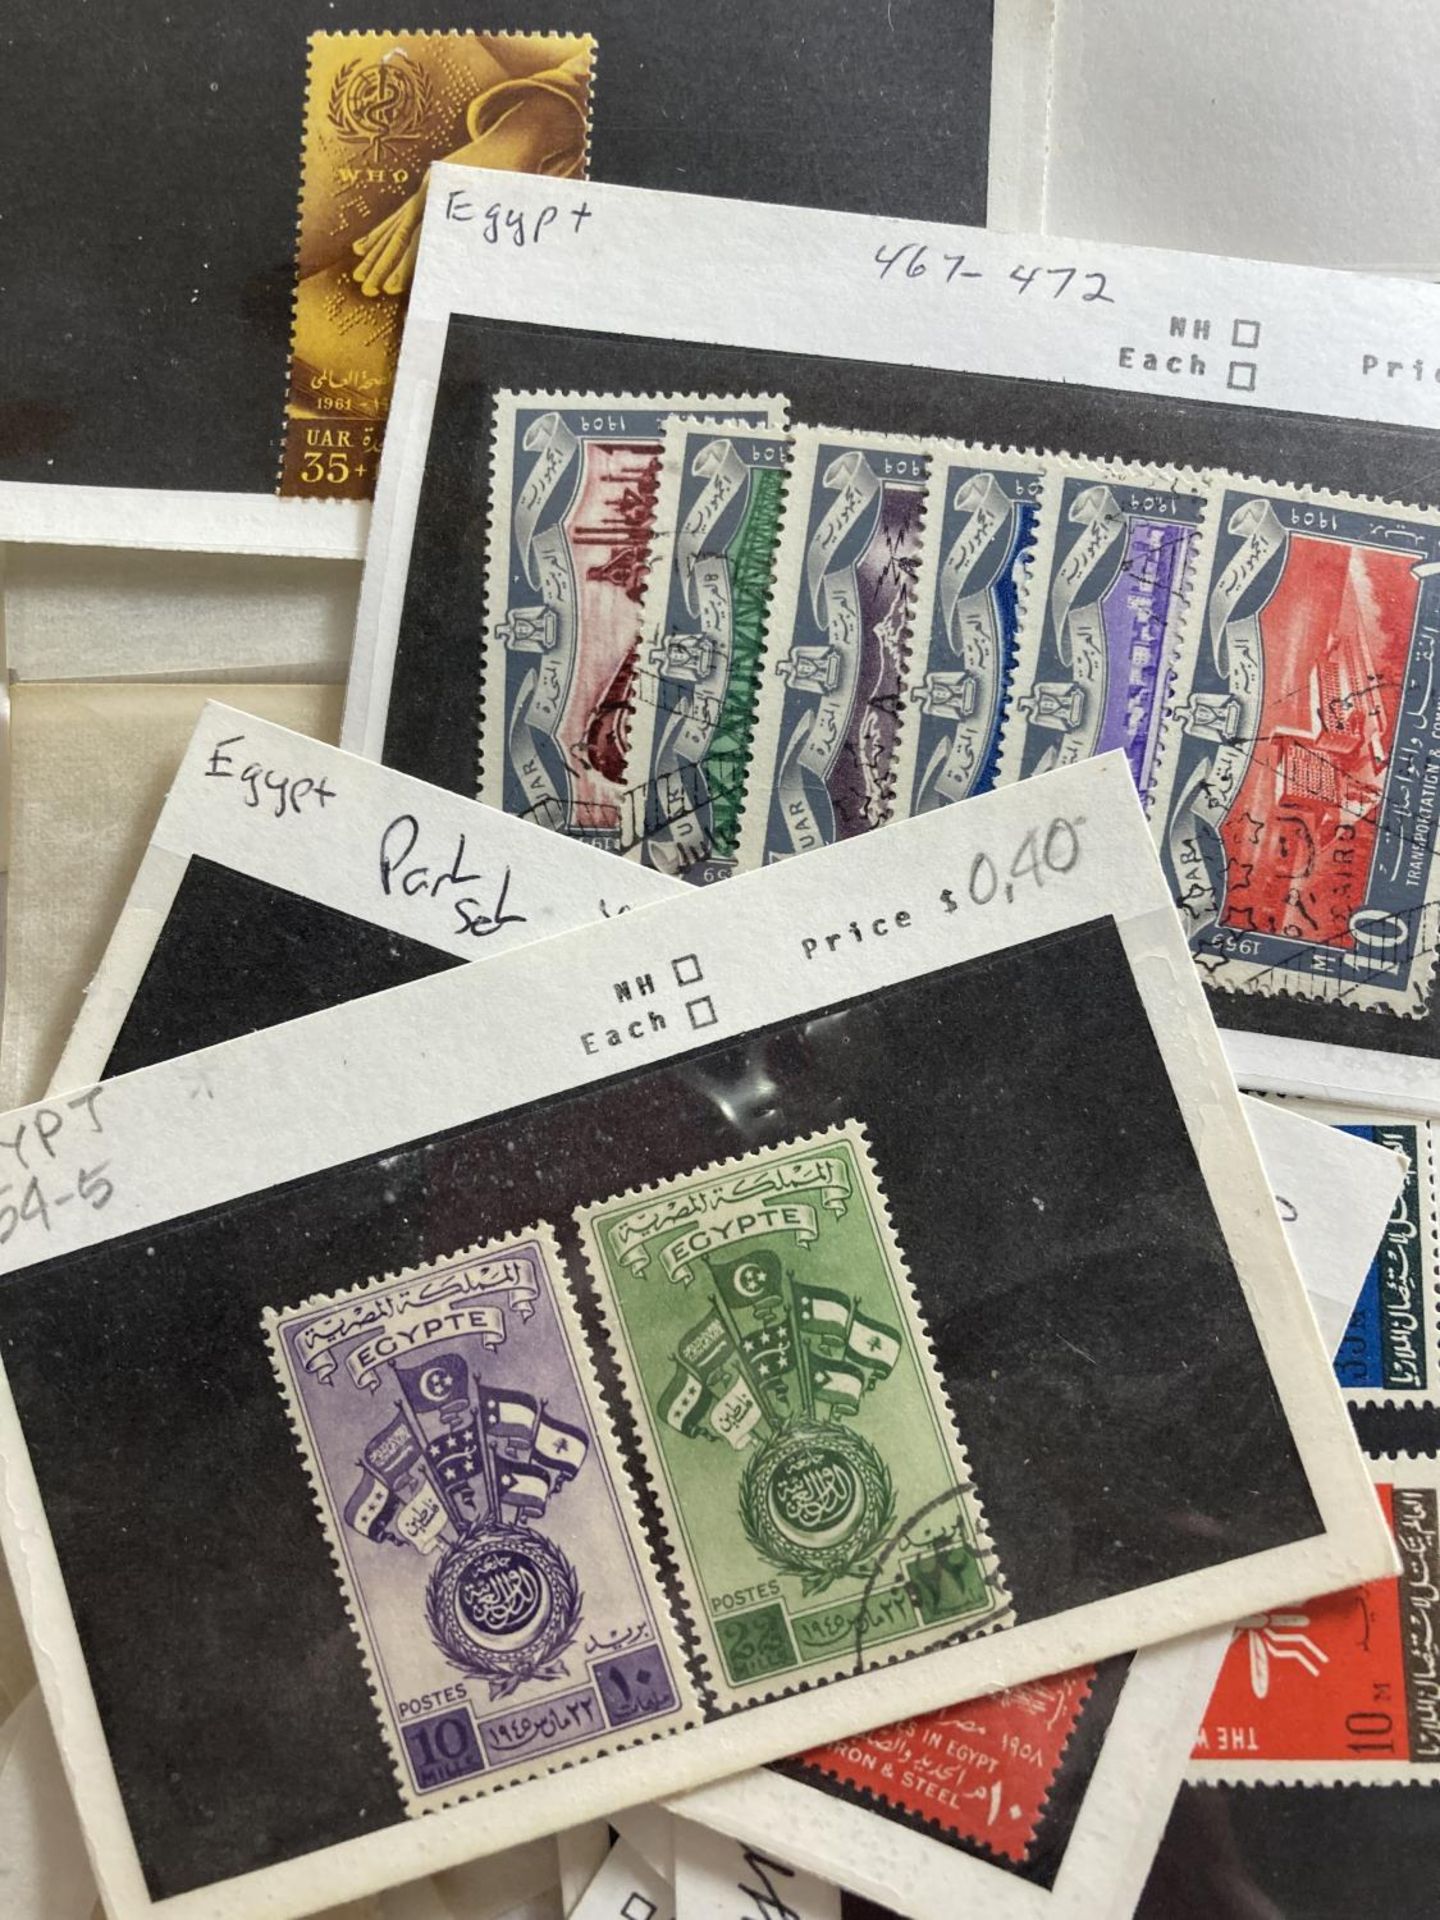 A MIXED LOT OF STAMPS TO INCLUDE EGYPT, POLAND INDONESIA, AFGHANISTAN, RUSSIA, MAURITANIA ETC MANY - Image 7 of 7